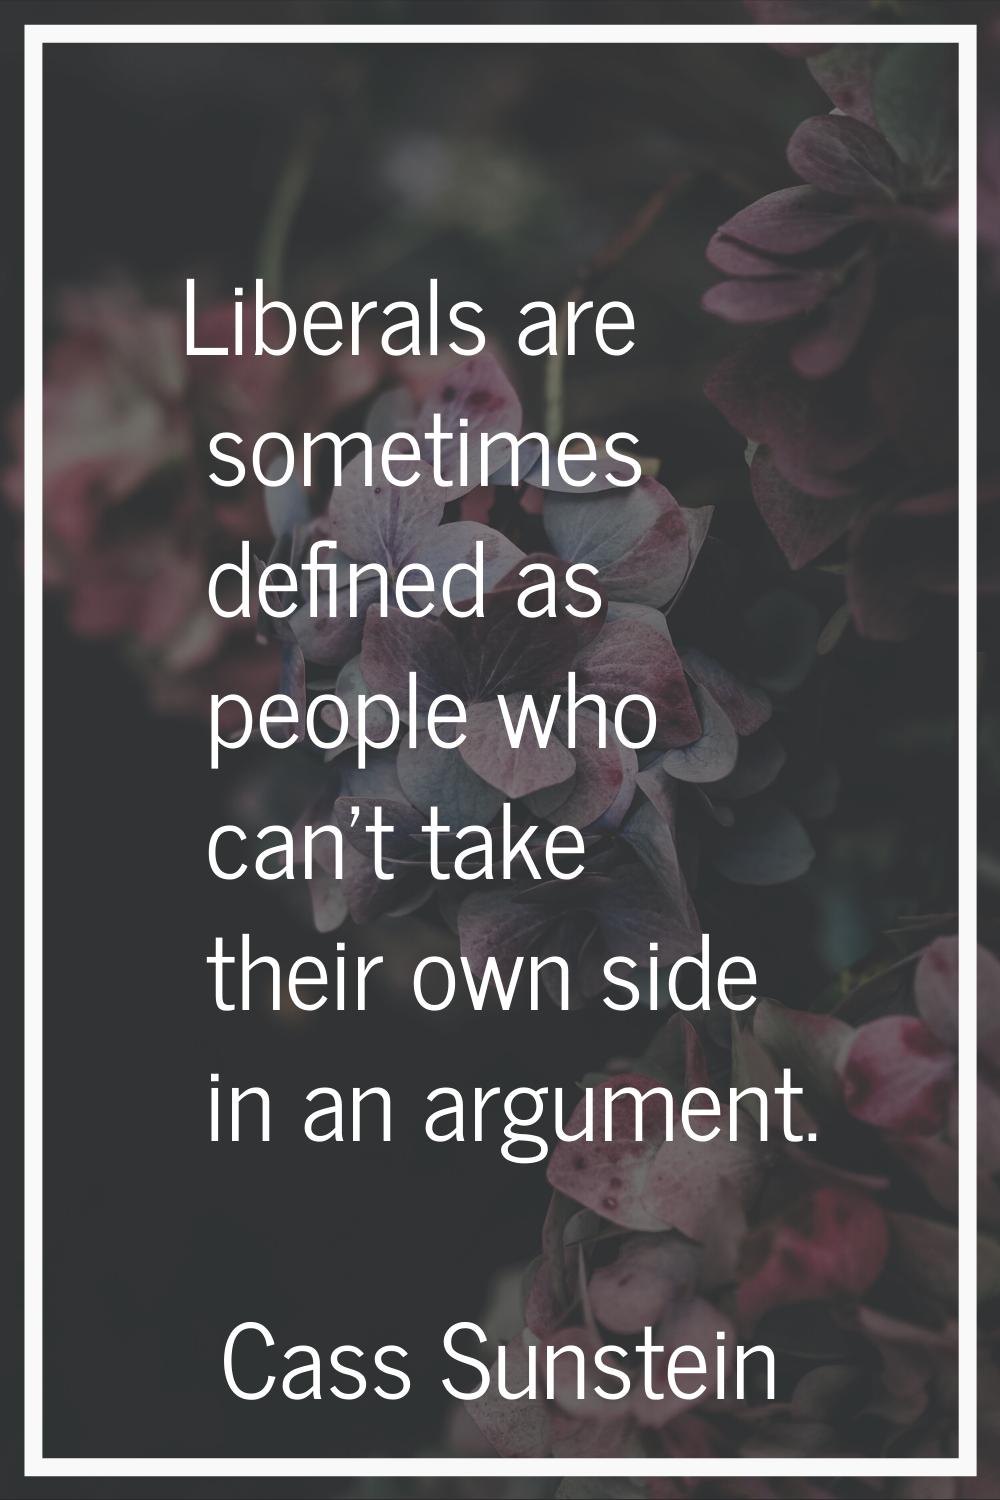 Liberals are sometimes defined as people who can't take their own side in an argument.